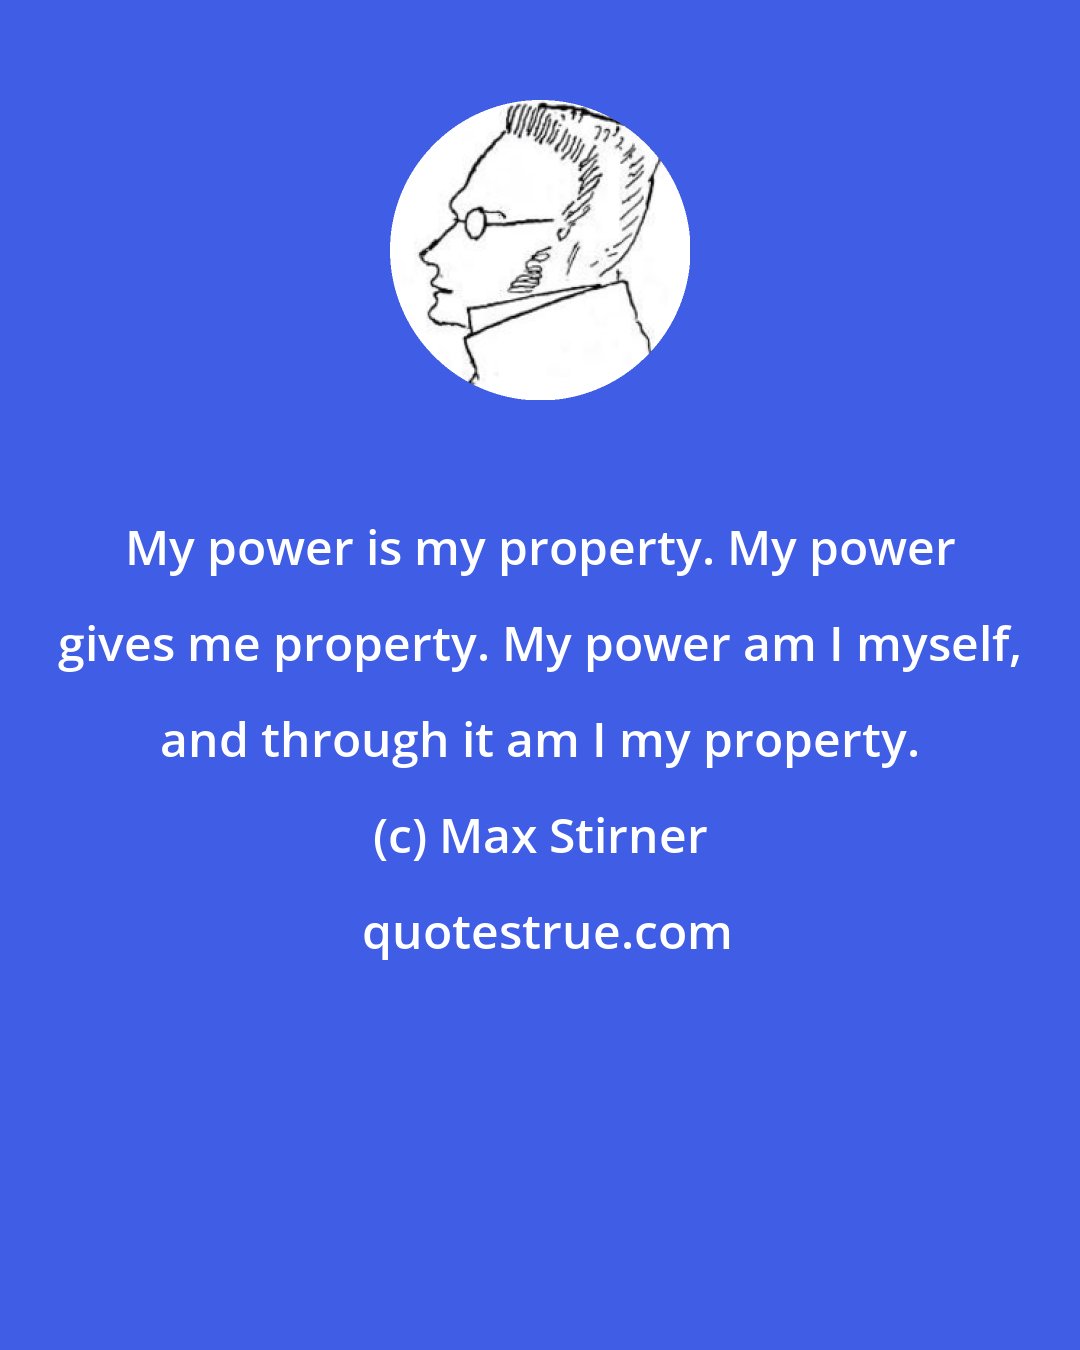 Max Stirner: My power is my property. My power gives me property. My power am I myself, and through it am I my property.